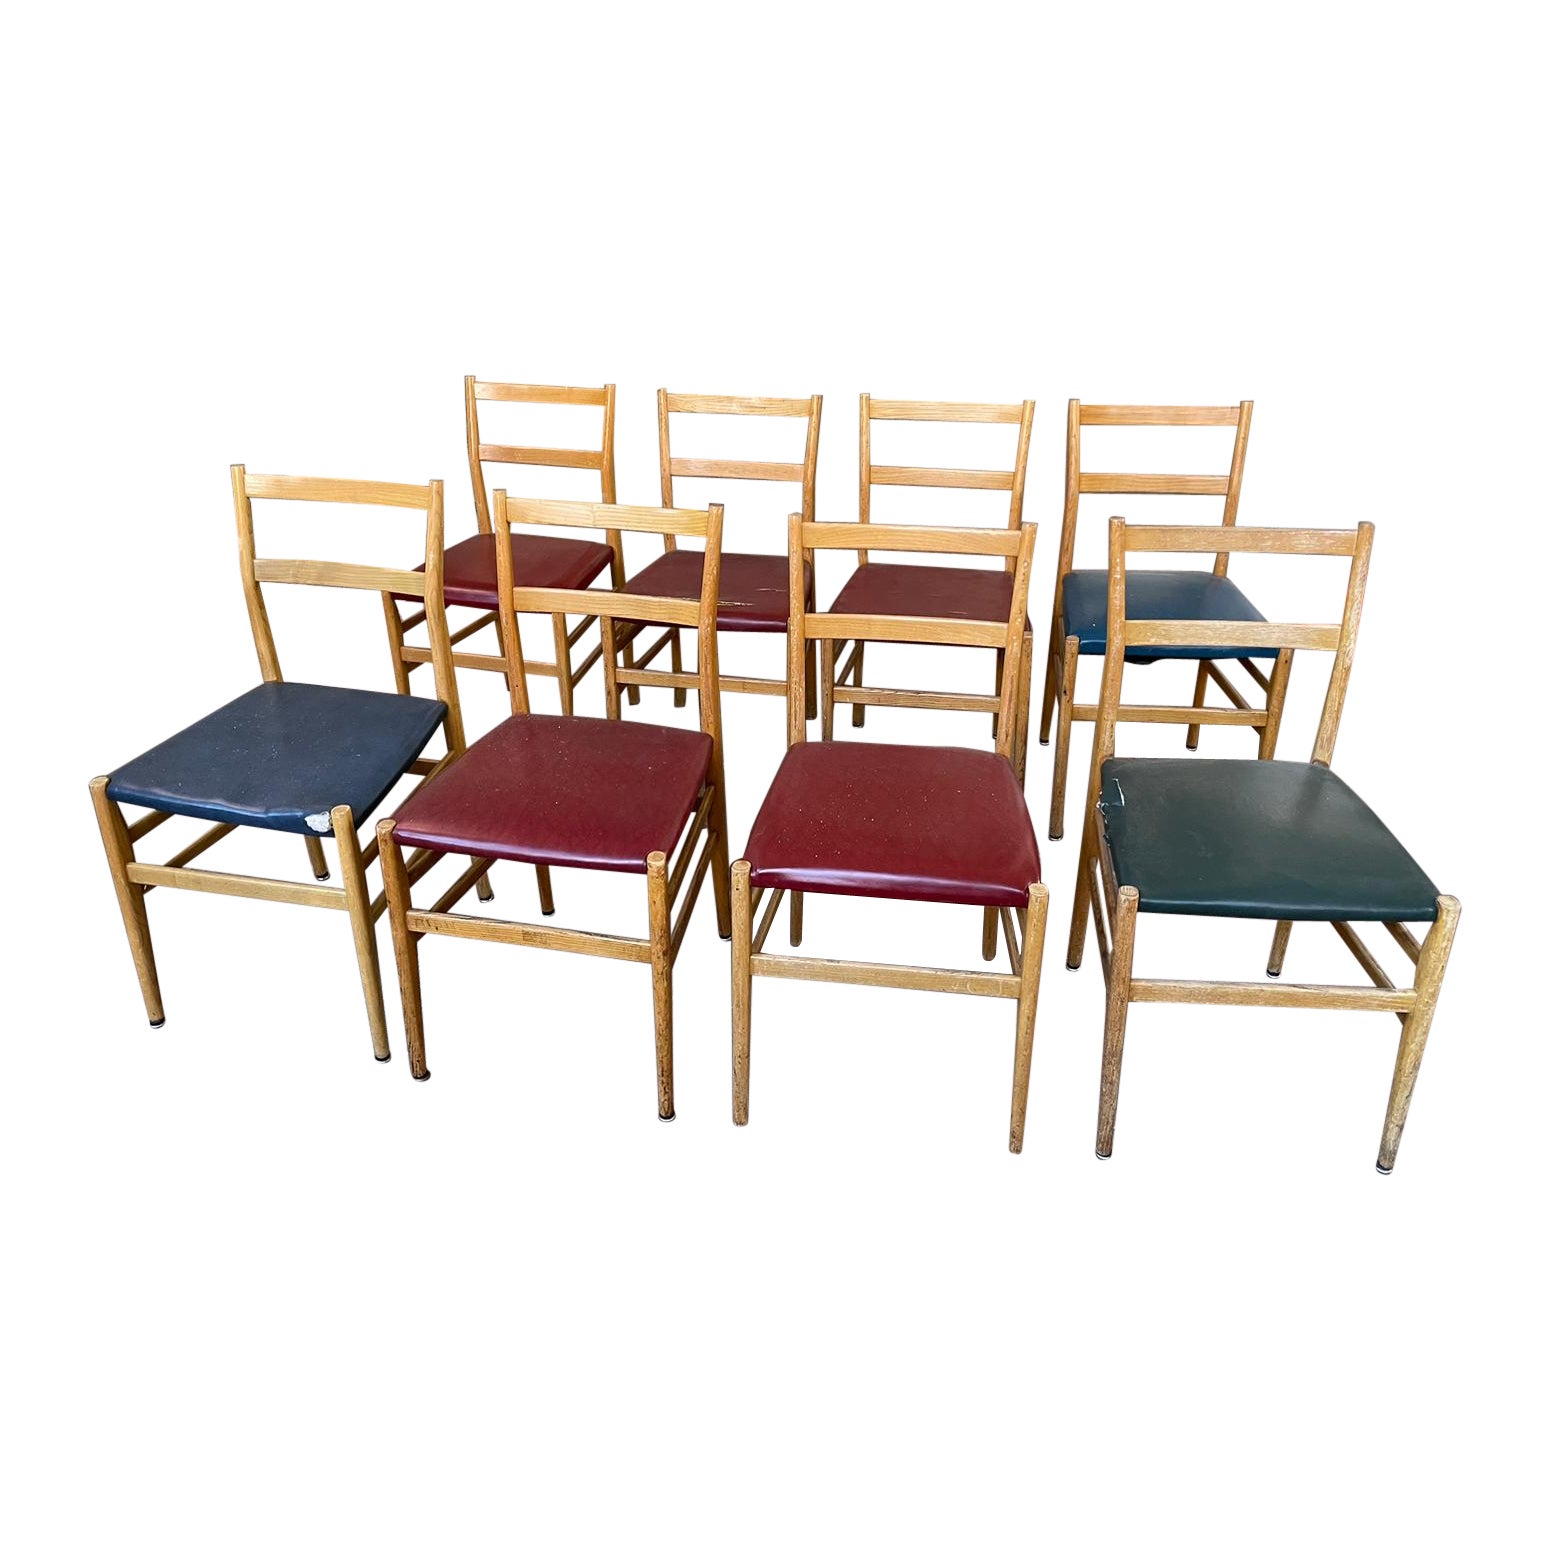 8 Italian Midcentury Dining Chairs by Gio Ponti for Cassina